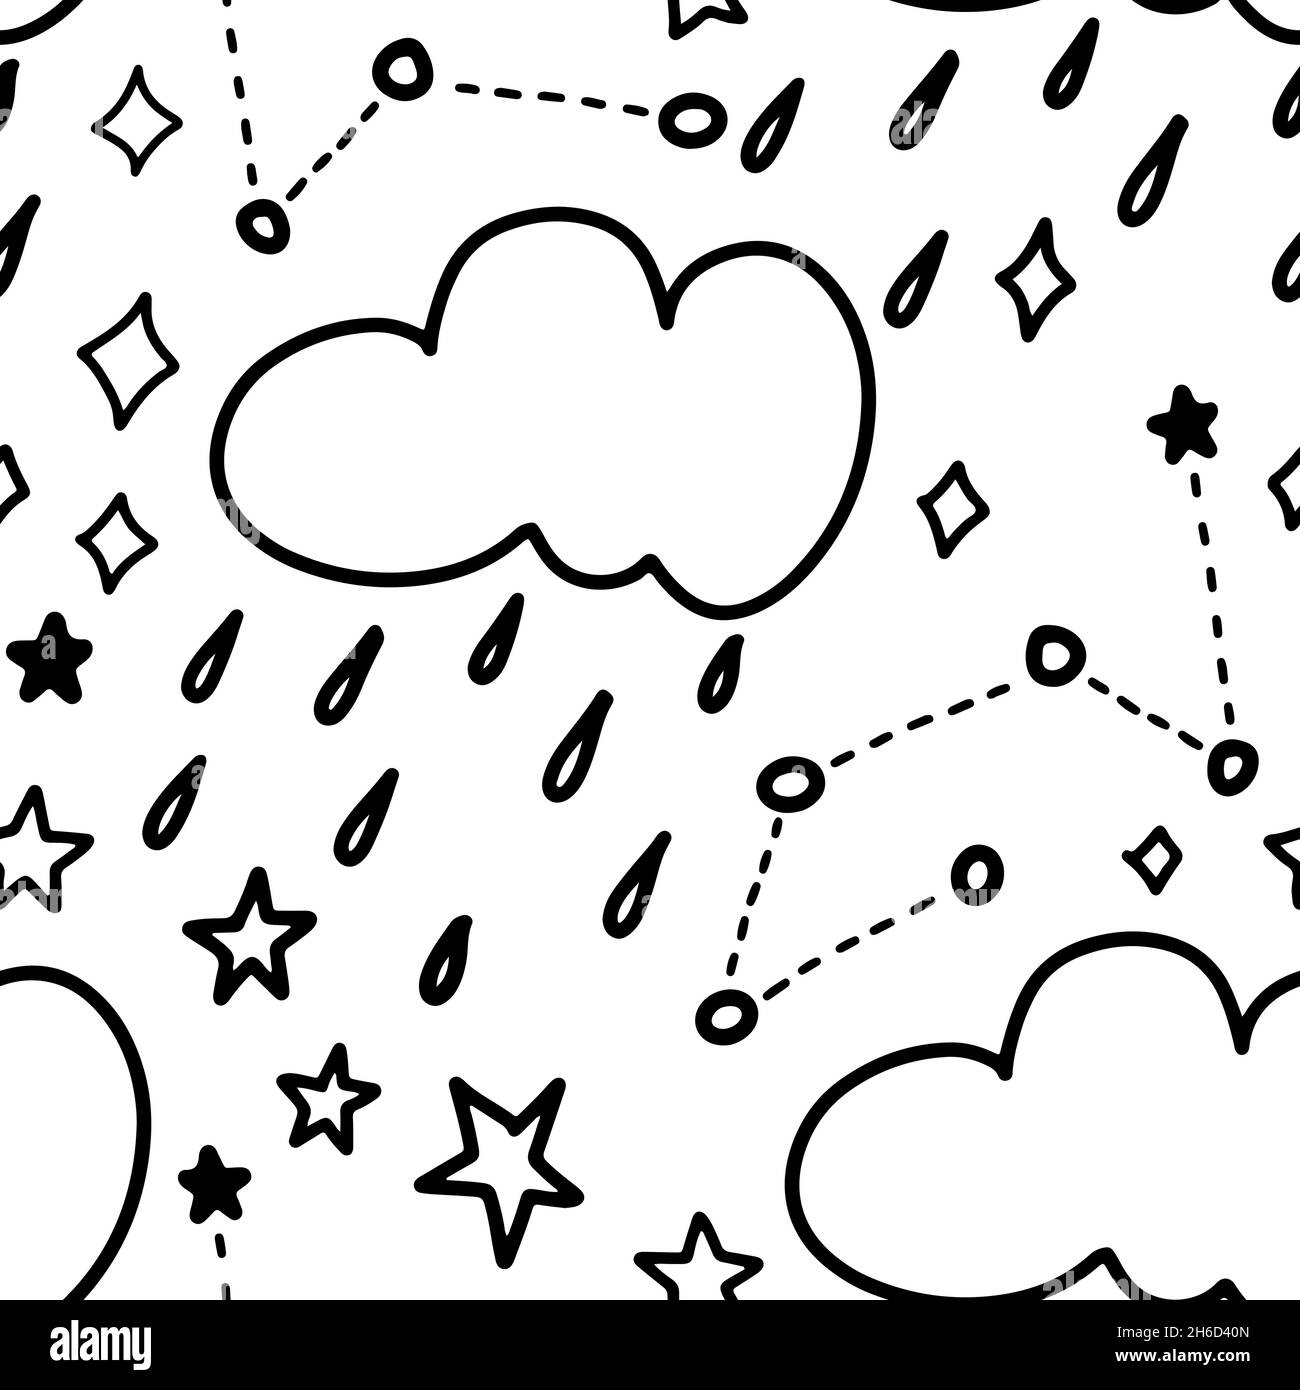 Doodle black and white clouds with rain, stars and cosmos seamless pattern. Cute night sky seamless background for textile, fabric, wrapping or kids Stock Vector